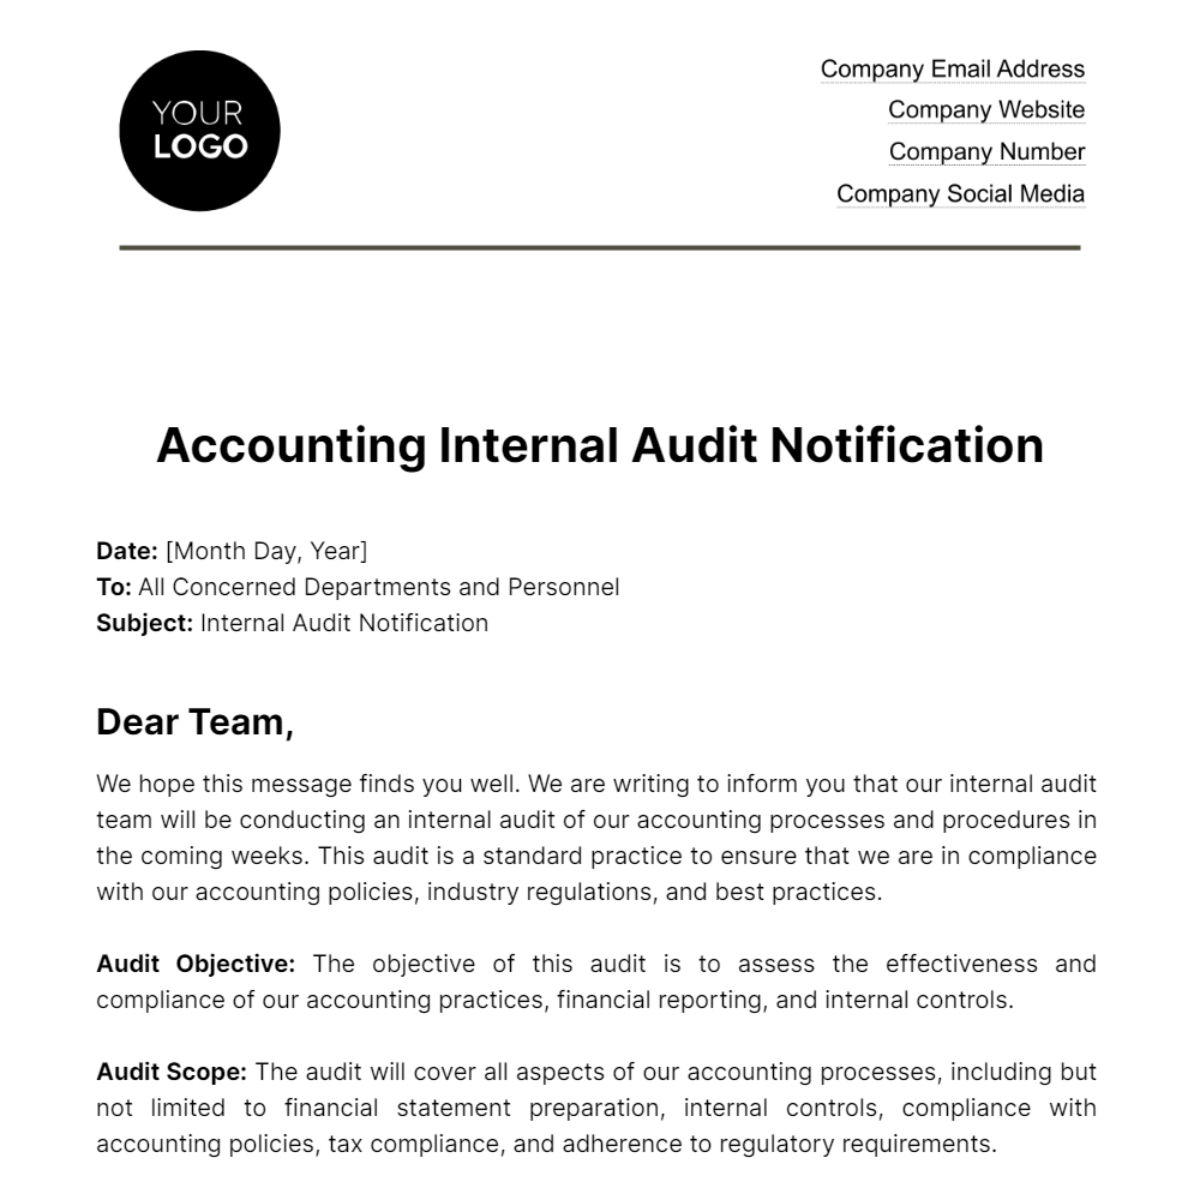 Accounting Internal Audit Notification Template